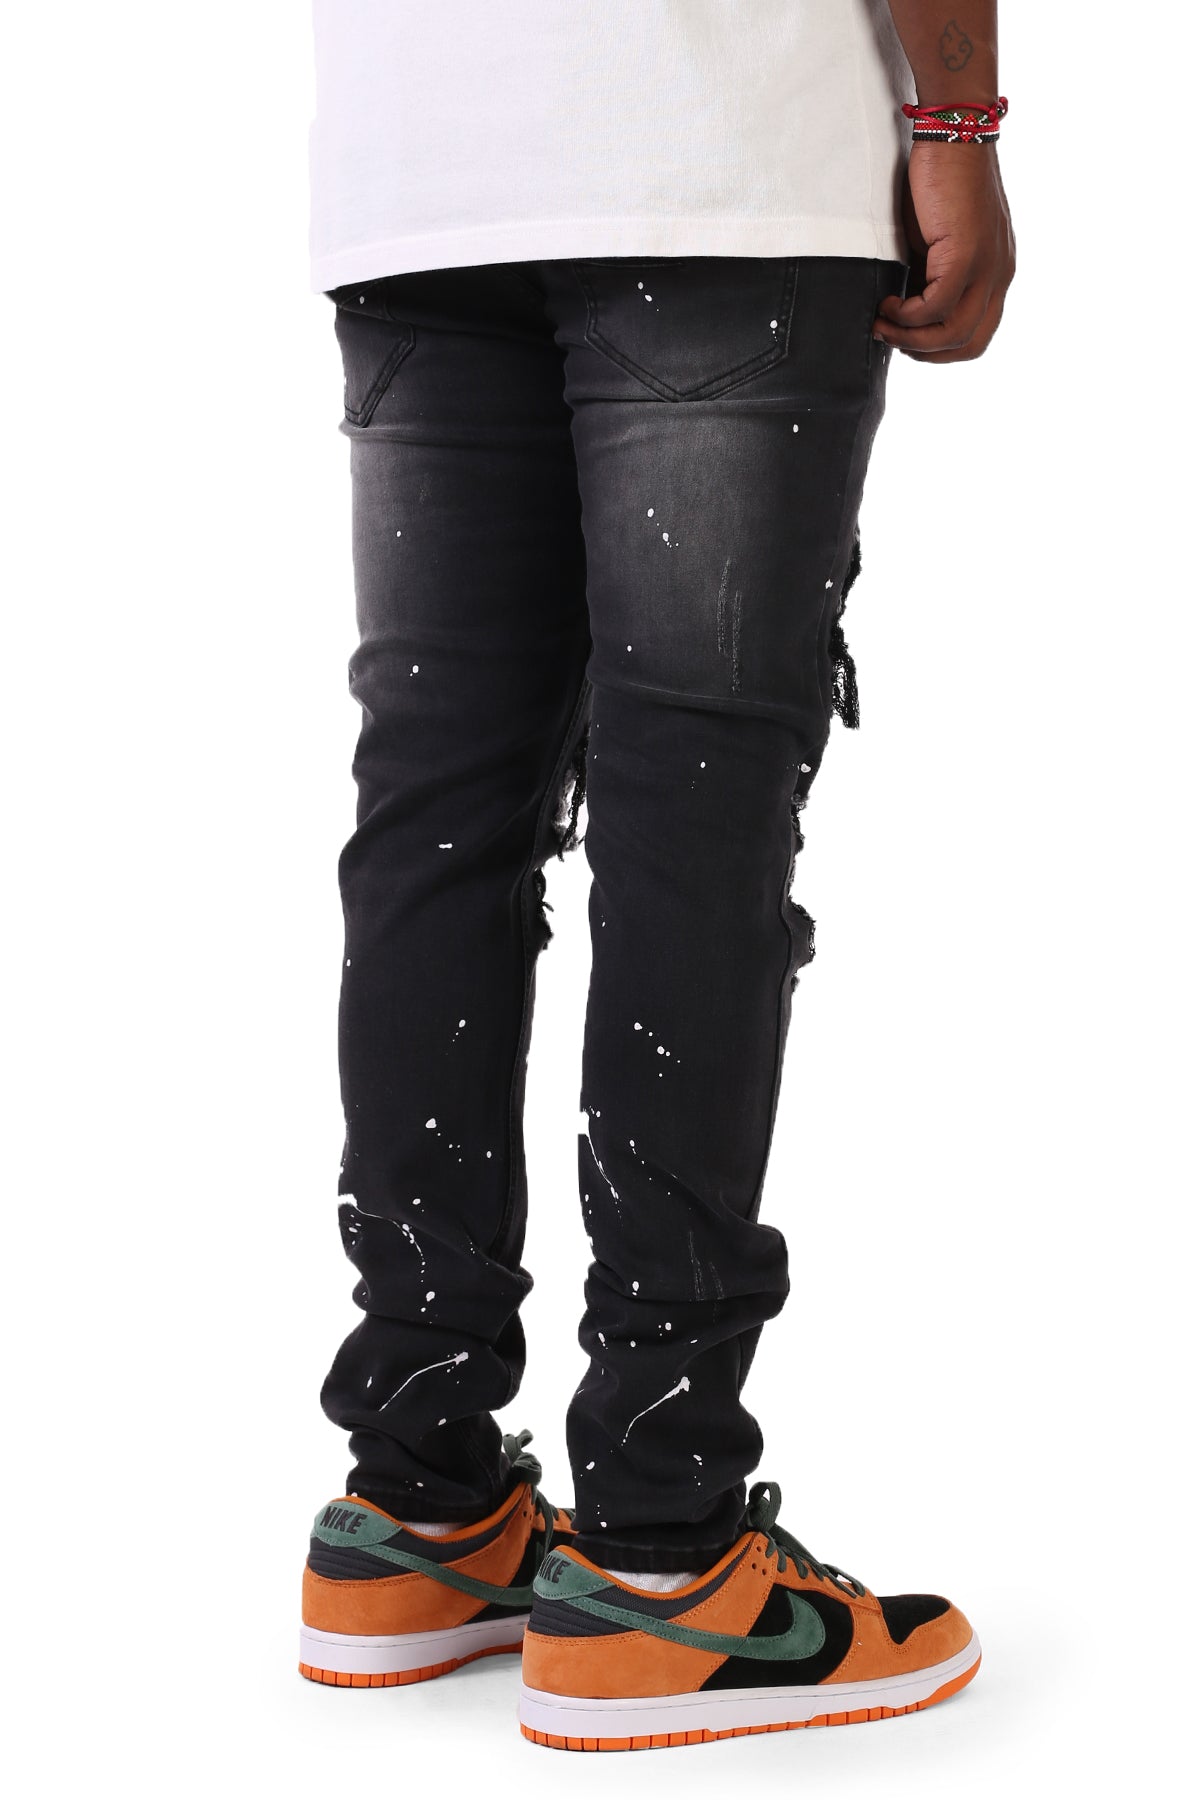 Green Rhinestones Patched Jeans (Black) (6562301182054)